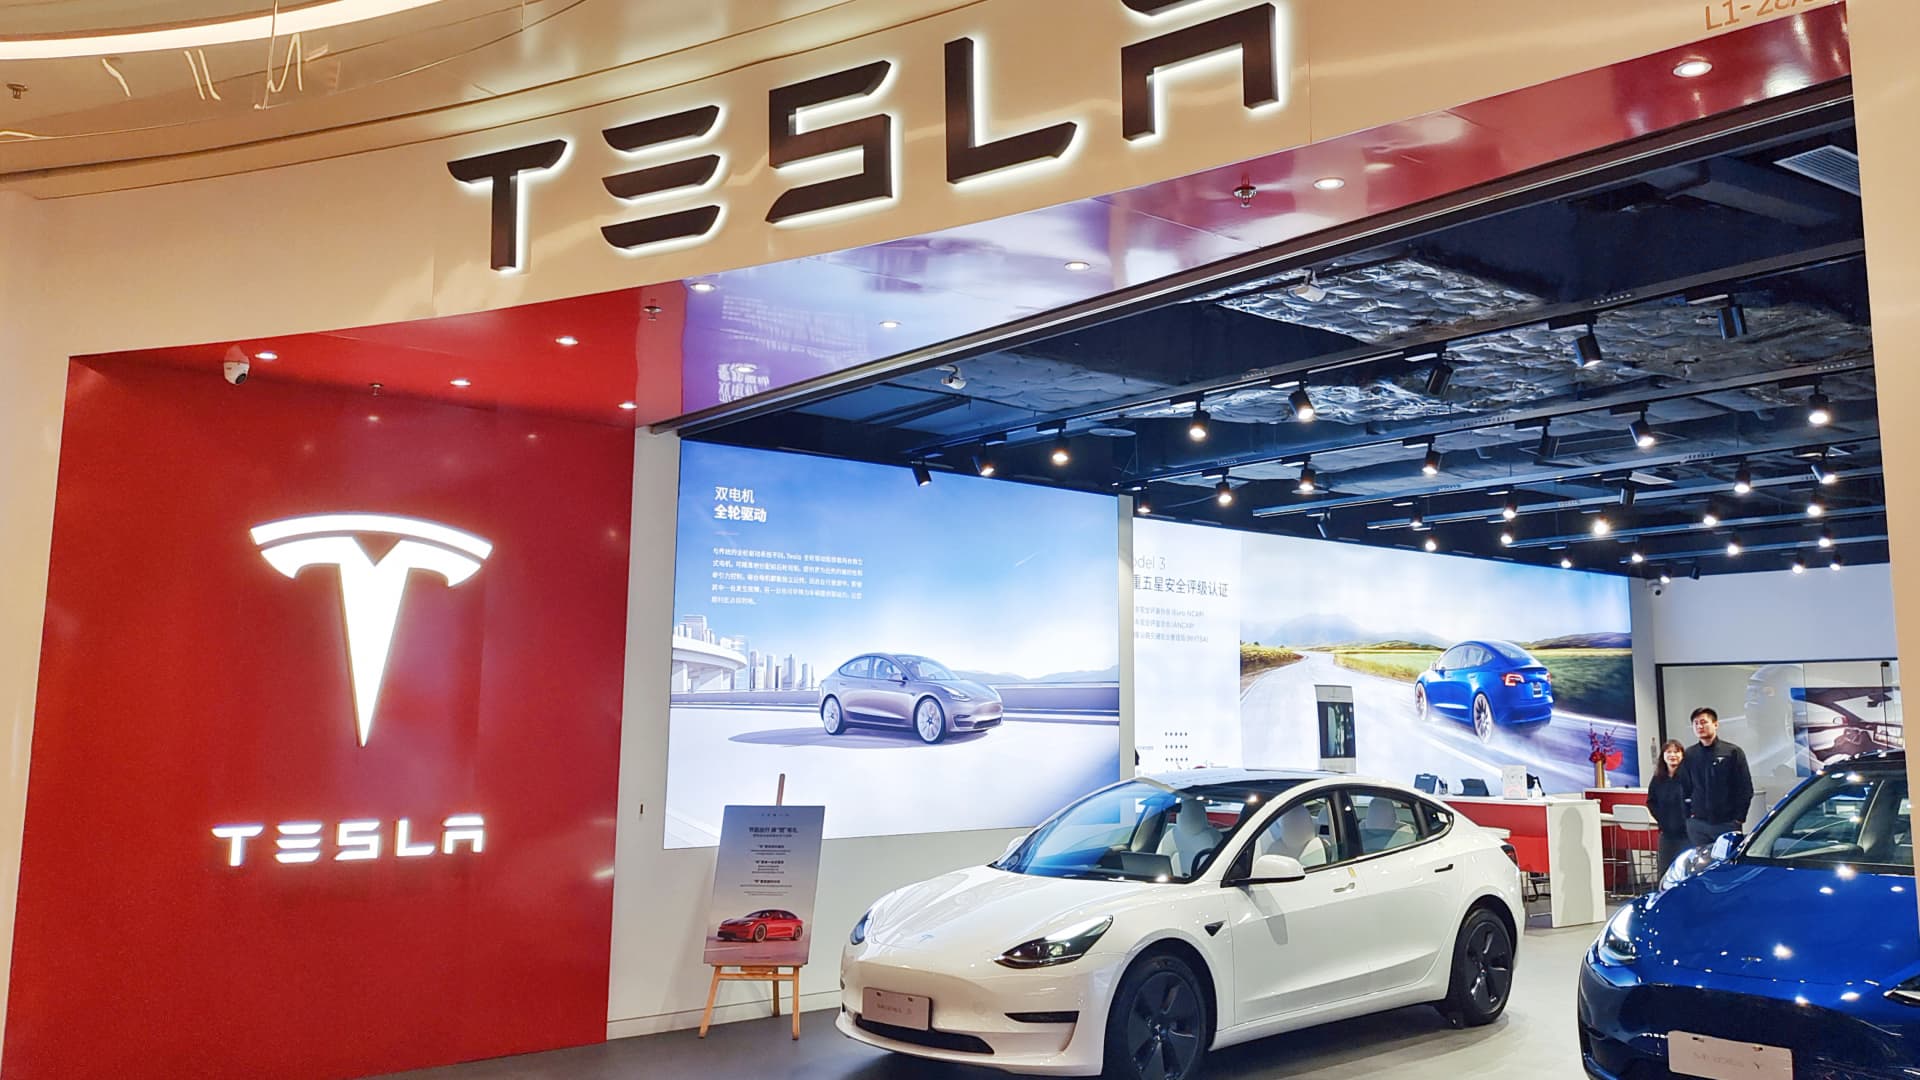 Tesla recalls 435,000 cars in China over rear light issue